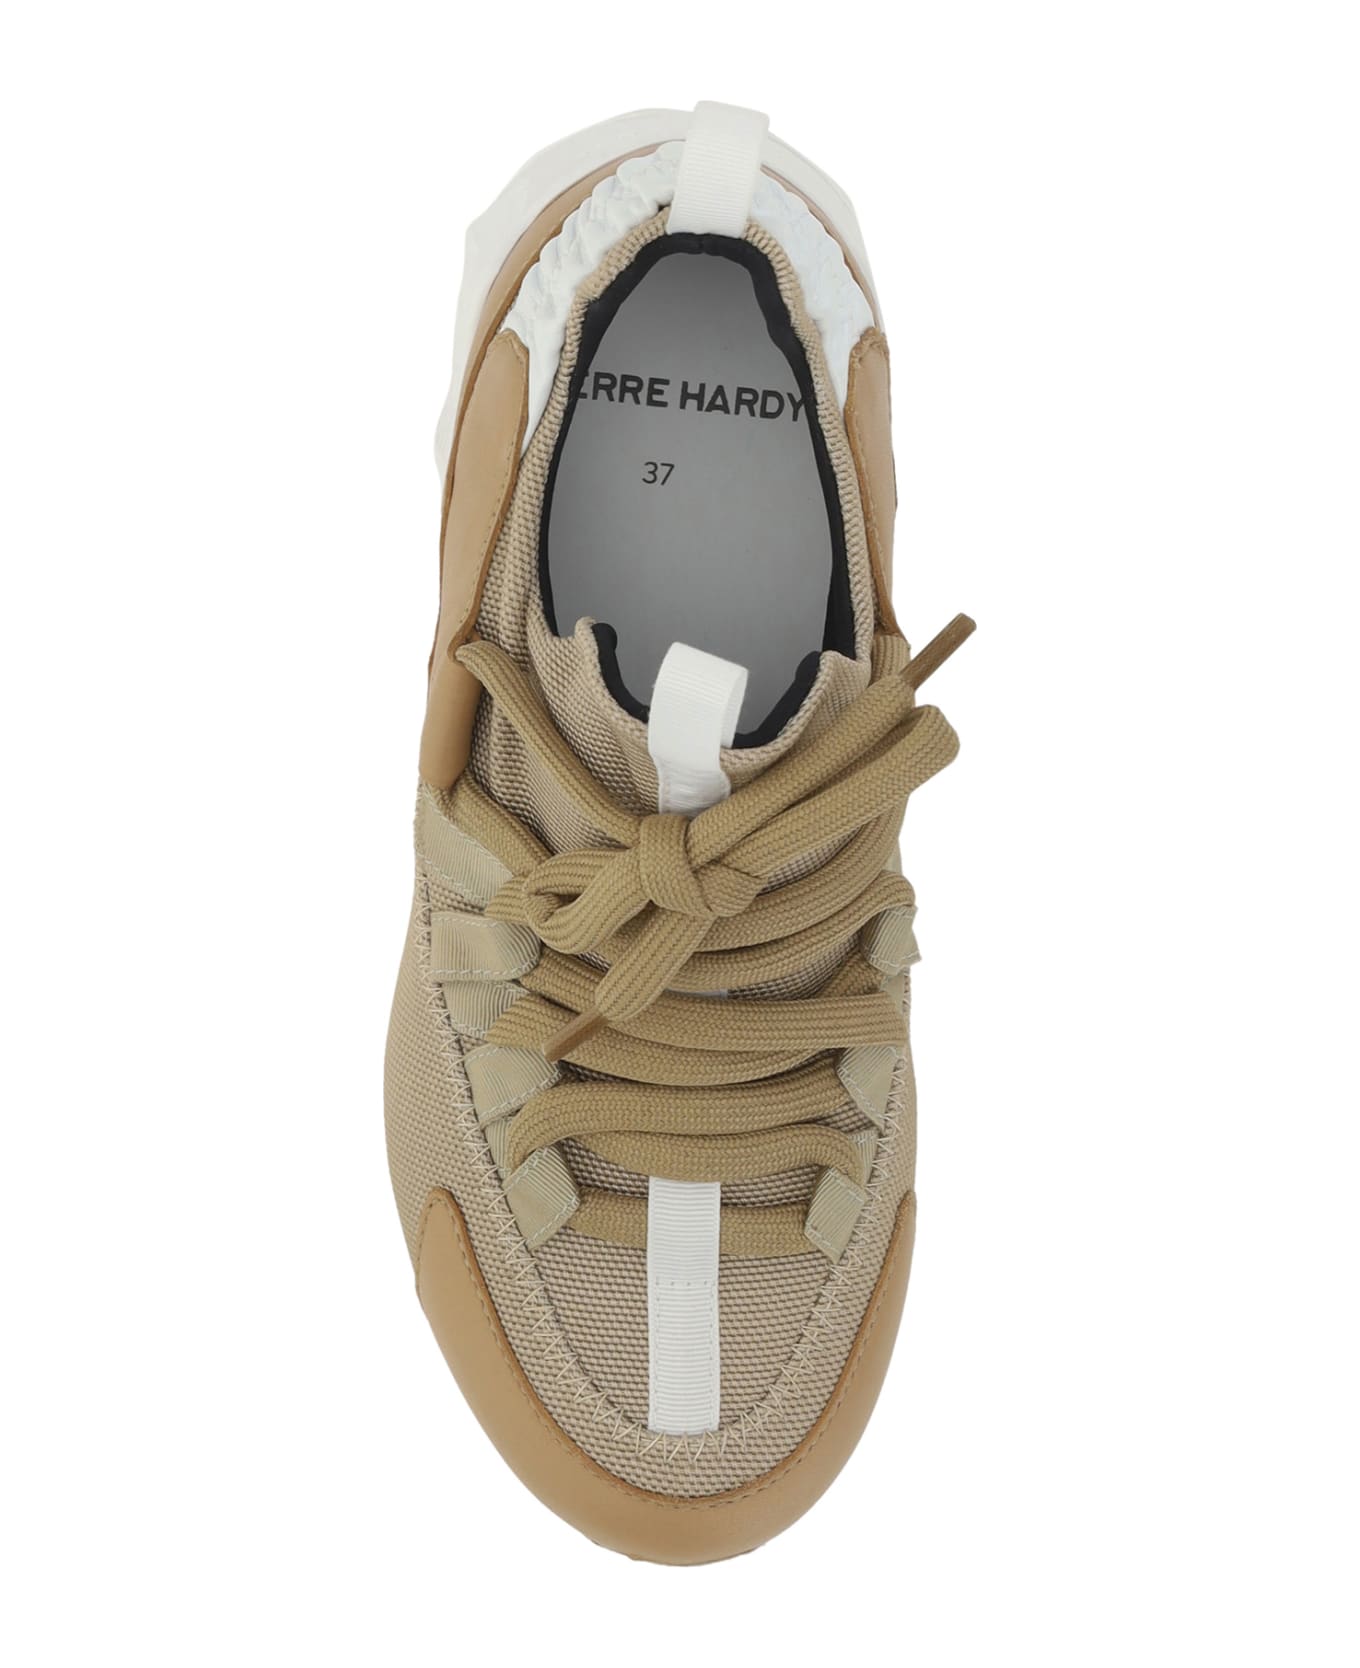 Pierre Hardy Trek Cosmetic Sneakers - Cappuccino/sand/white スニーカー